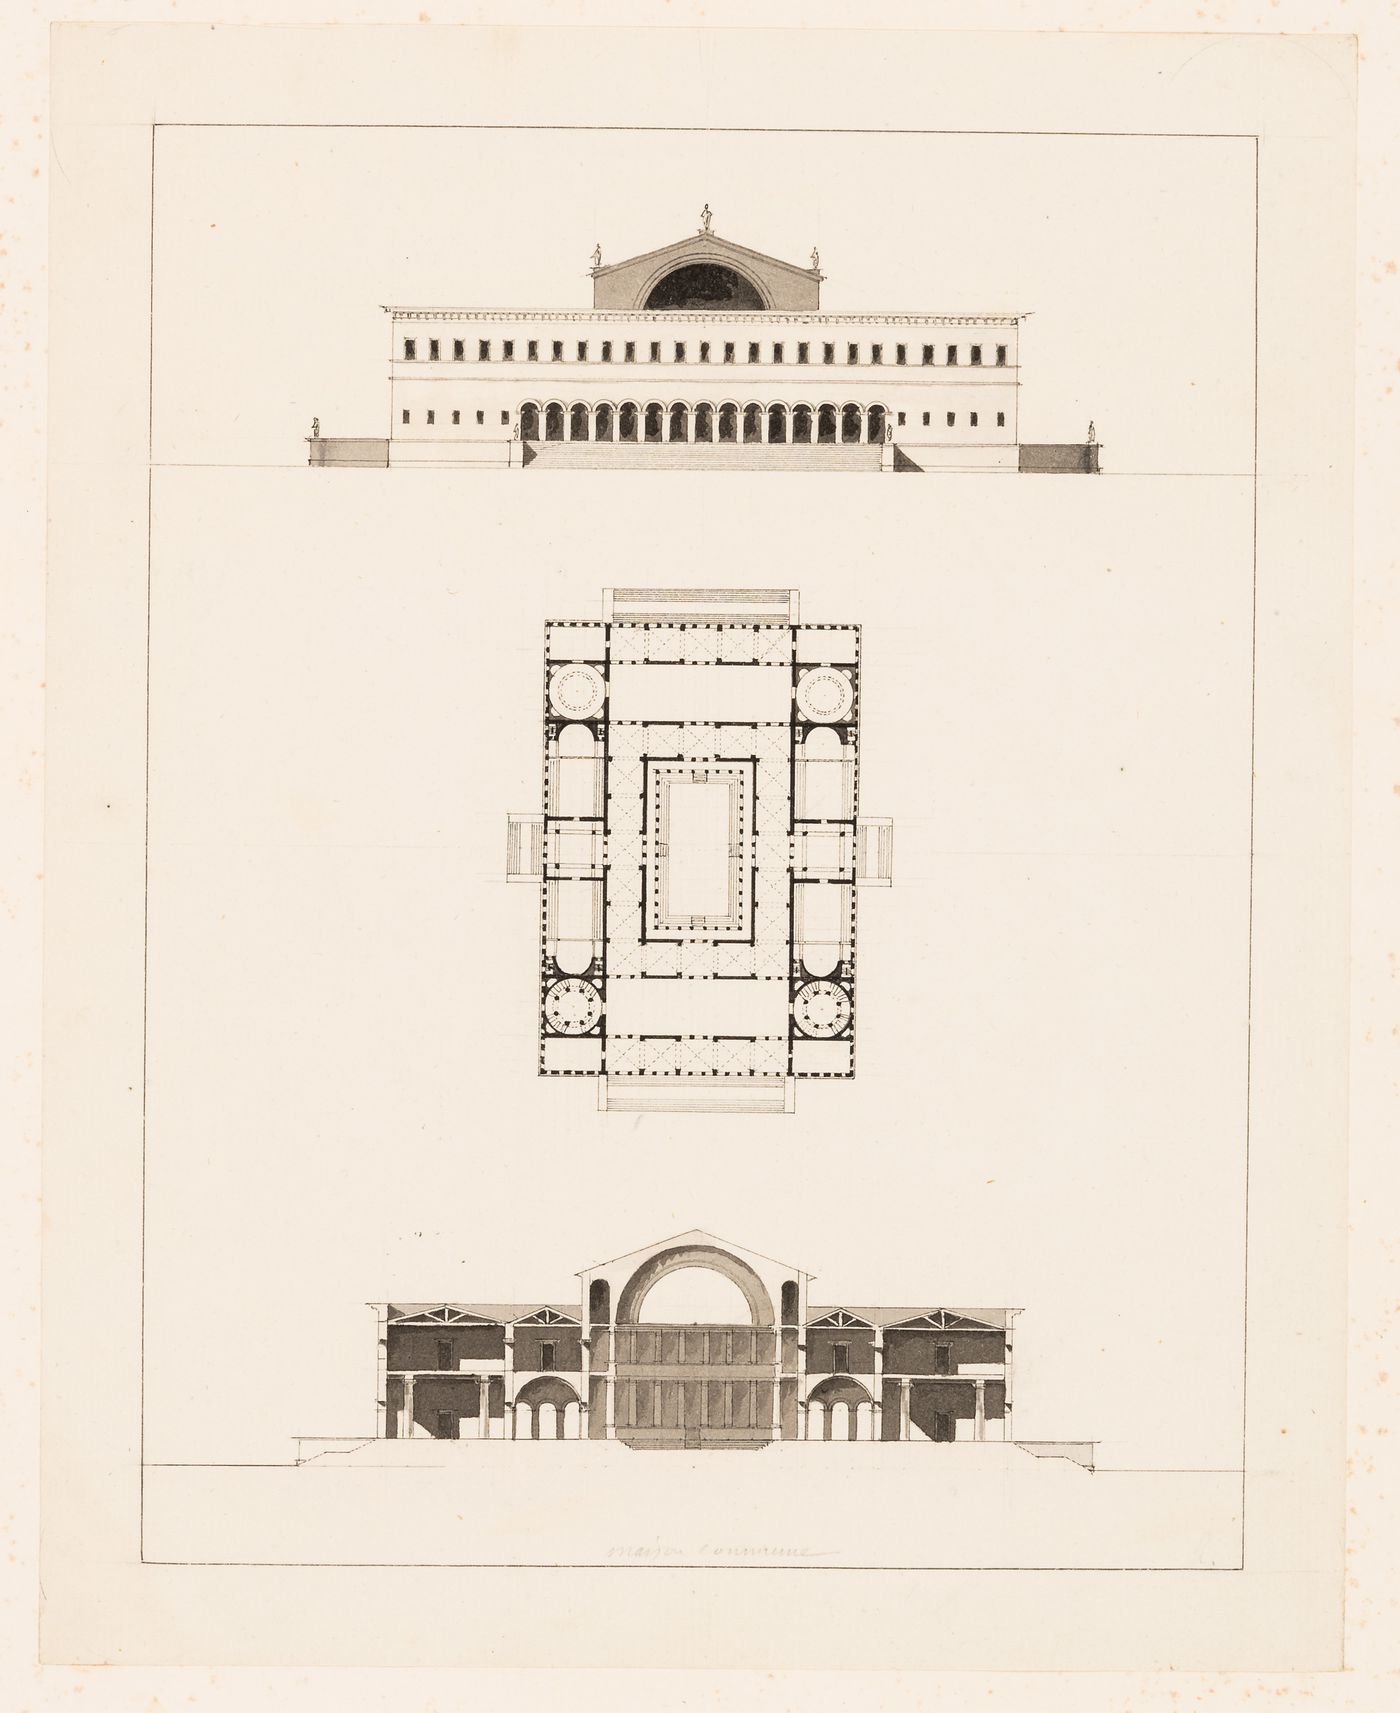 Plan for an exchange; Section and plan for a Christian basilica, perhaps for the Concours d'émulation, February 1801; Elevation and plan for an unidentified building, possibly an exchange; verso: Elevation, plan and section for a maison commune